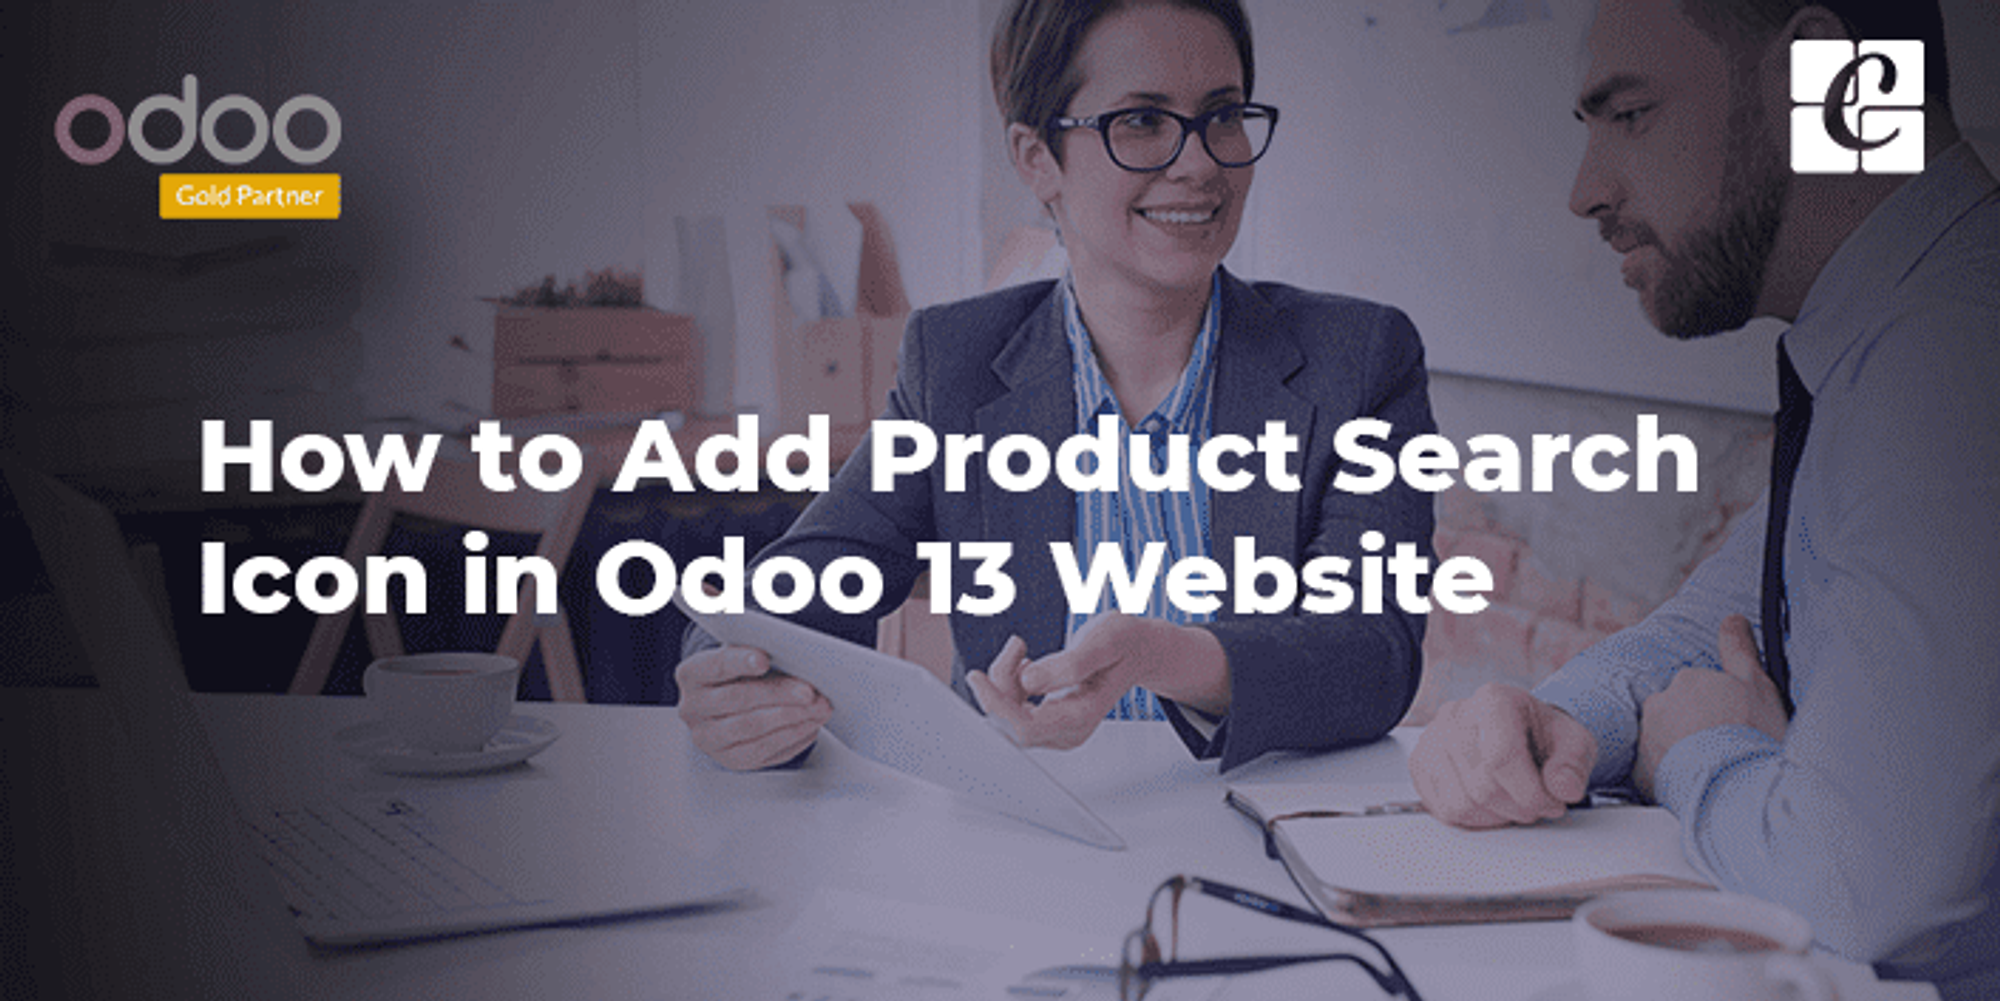 How to Add Product Search Icon in Odoo 13 Website